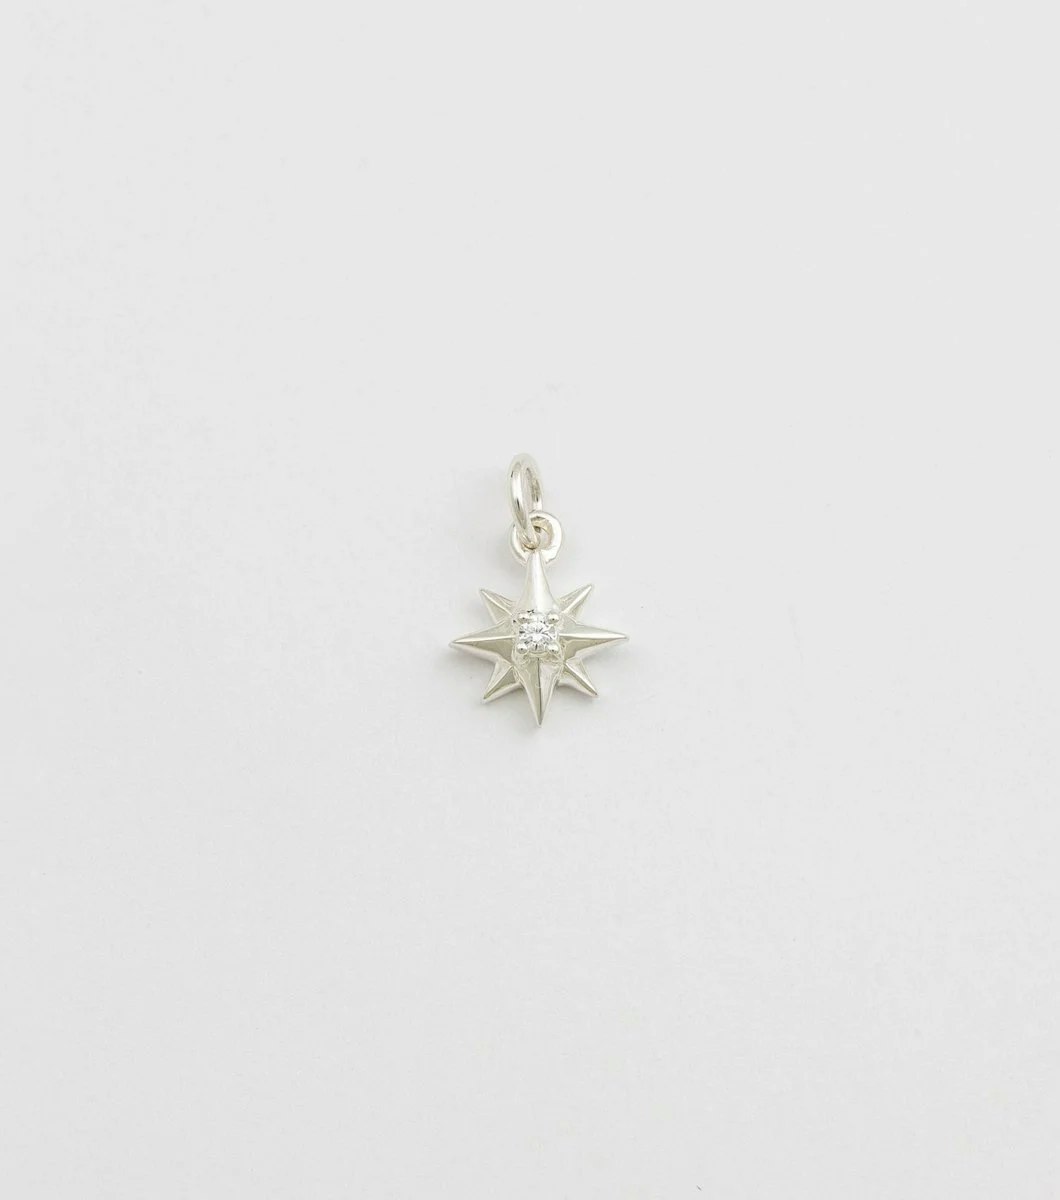 Beloved Pendant Silver Compass Star Syster P